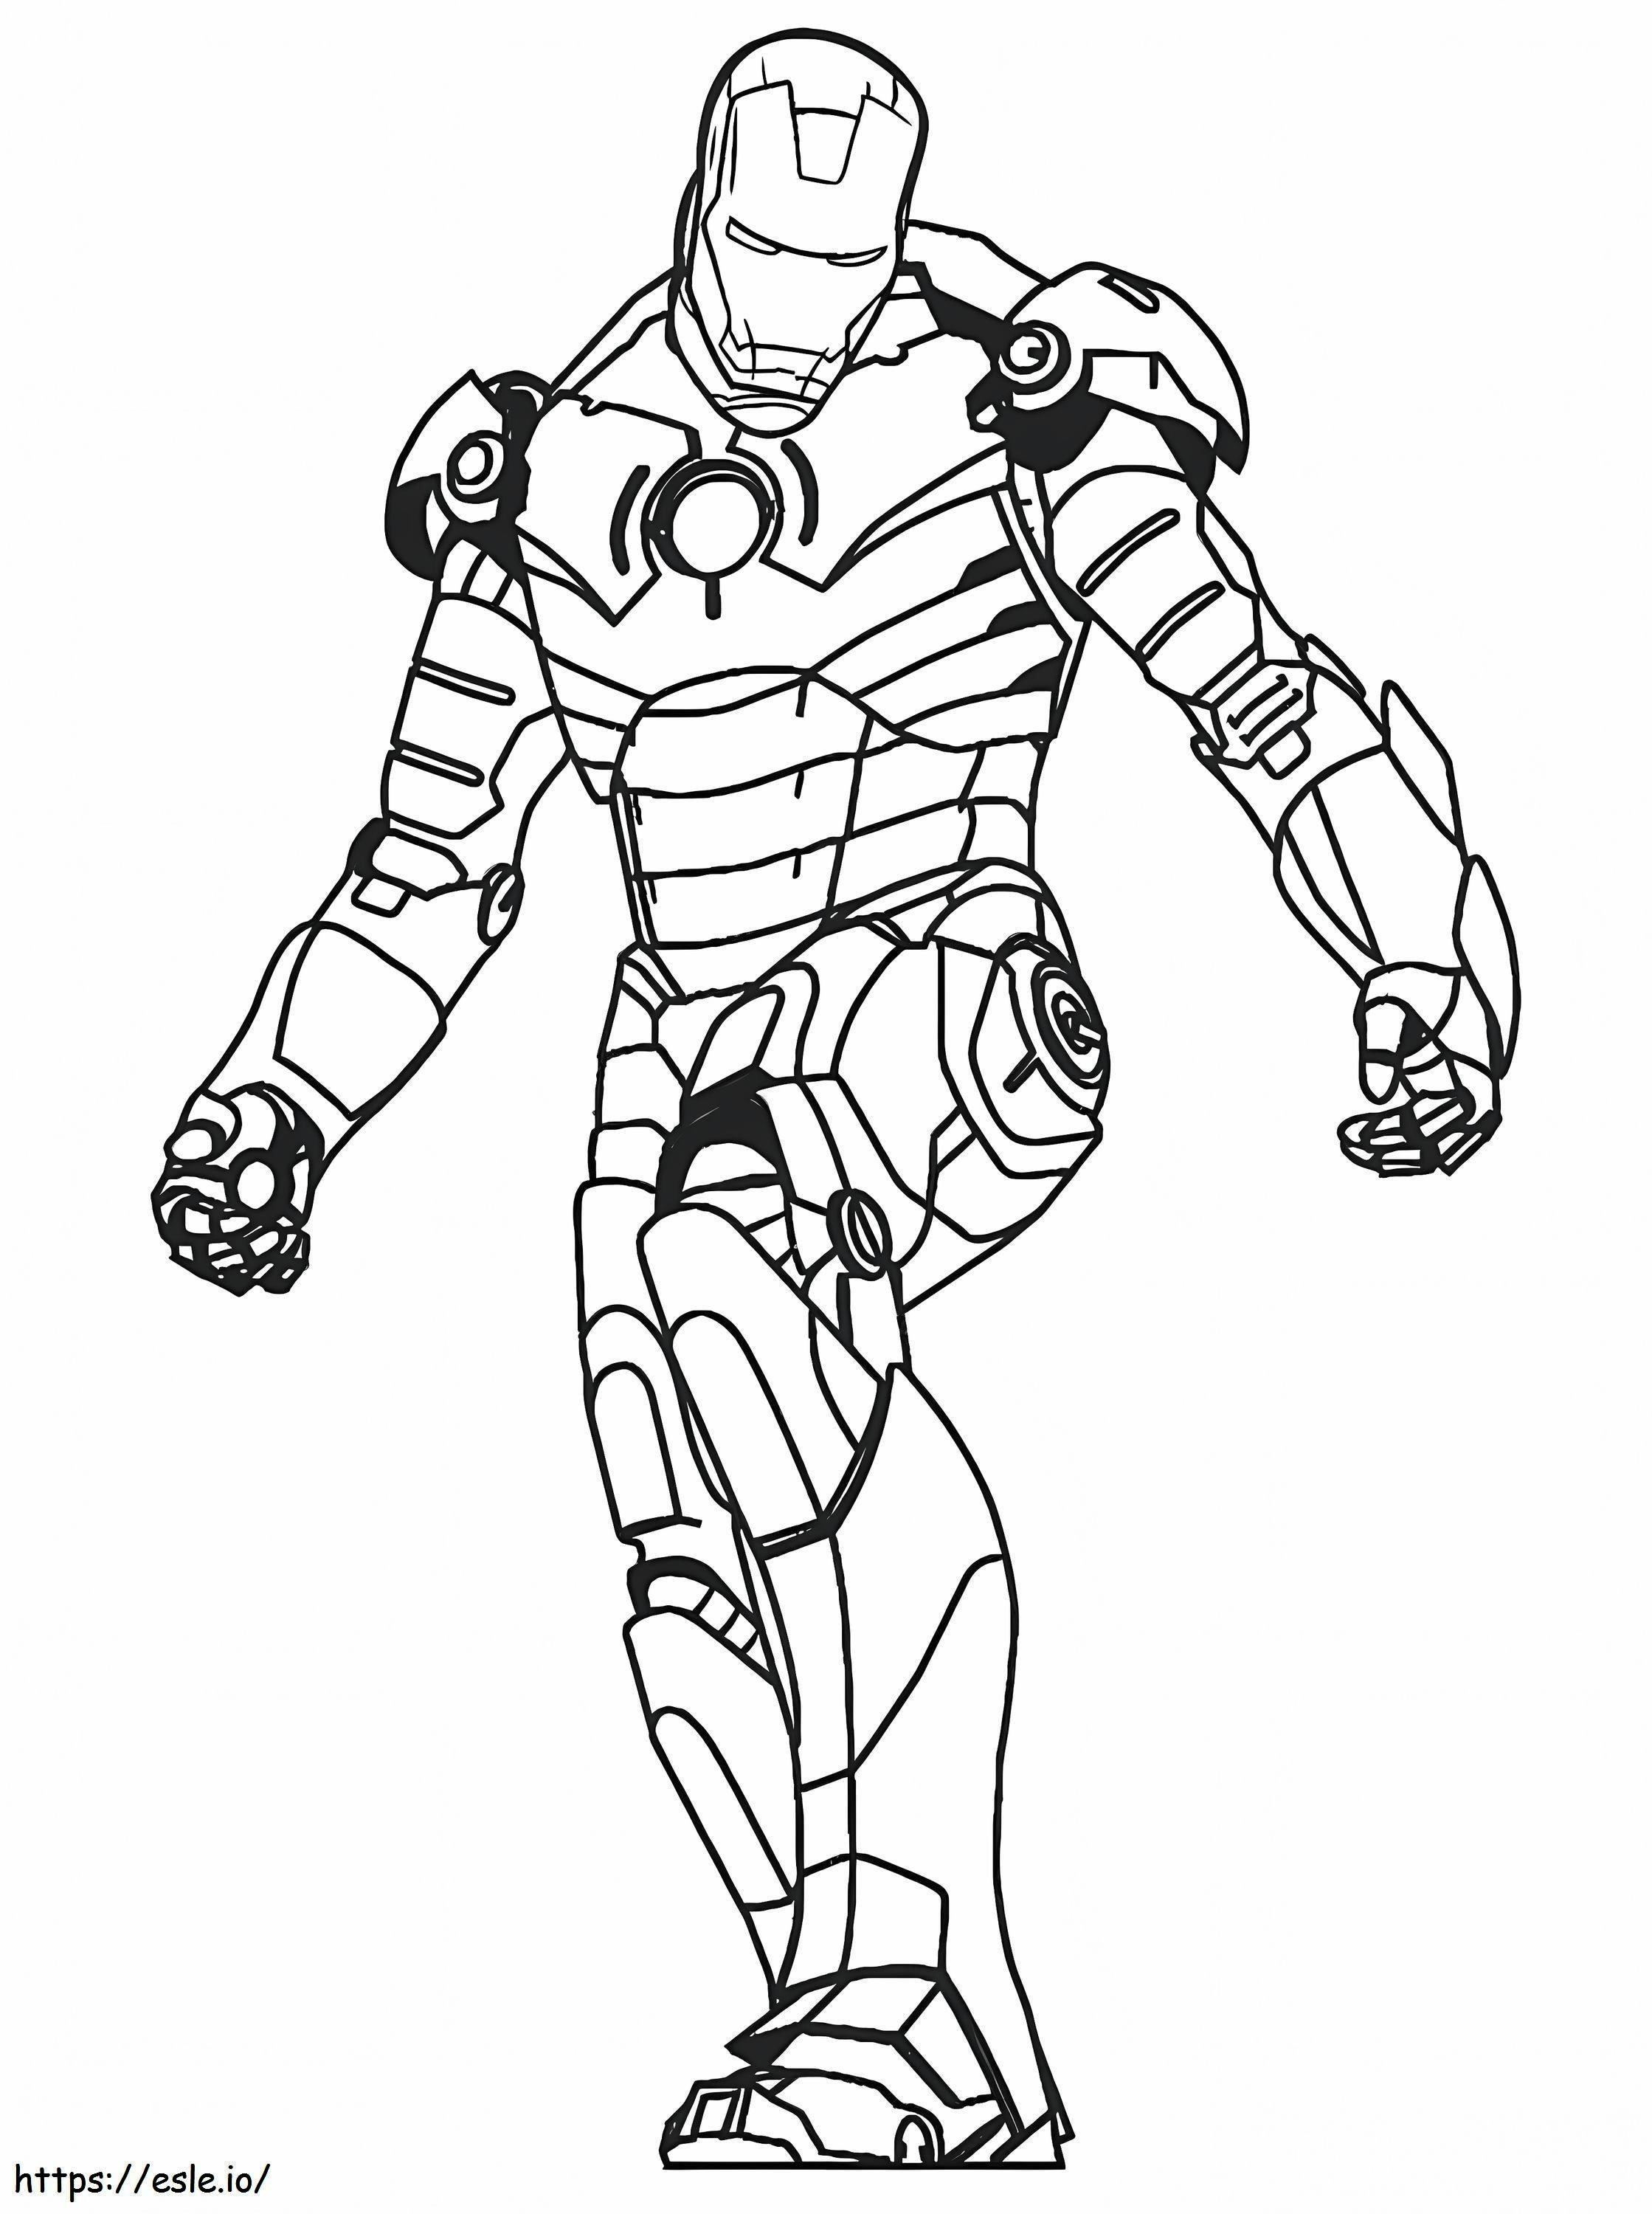 Ironman Free Images coloring page